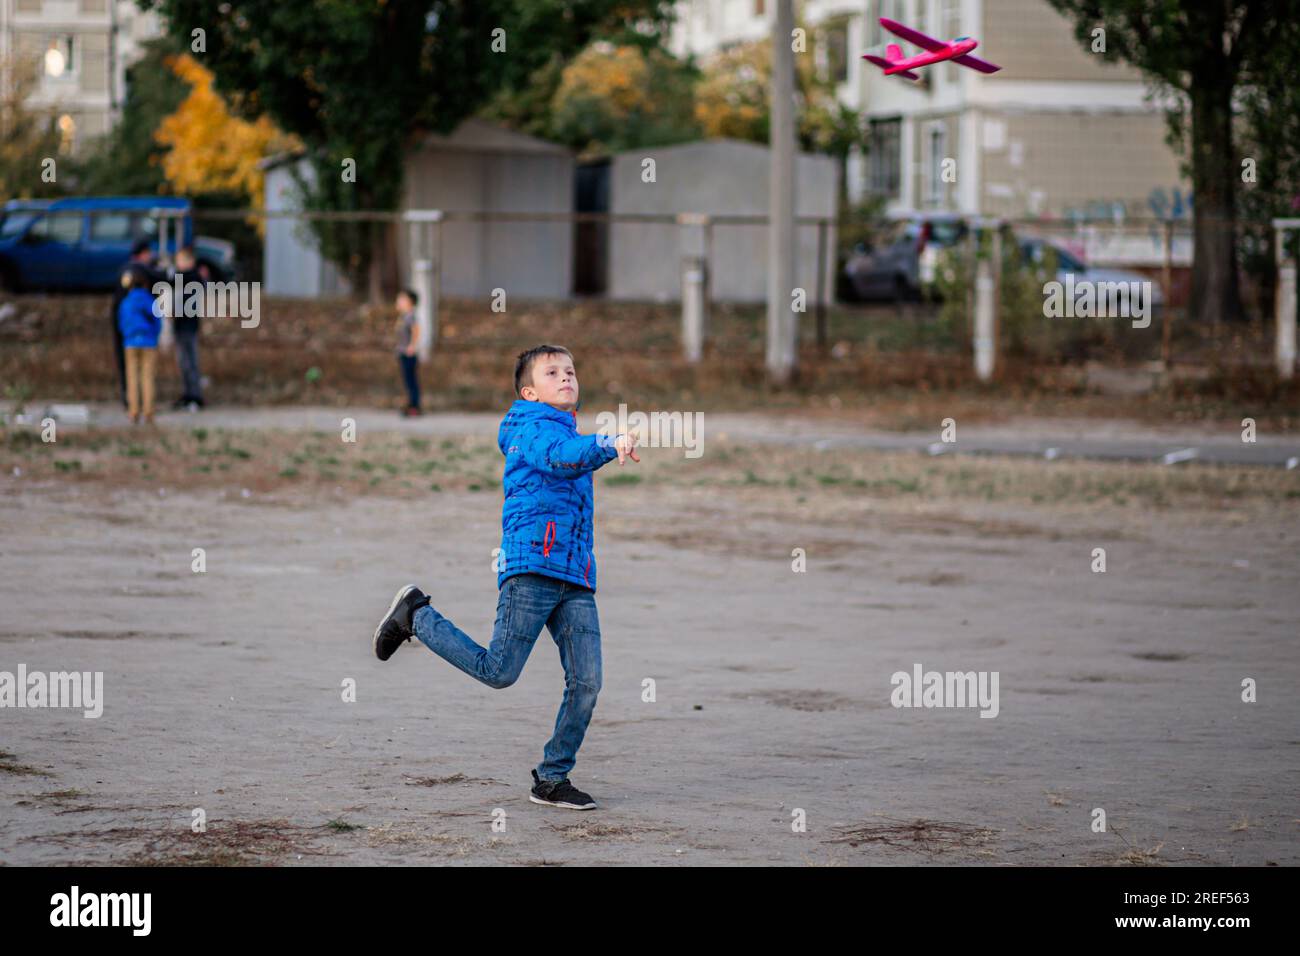 Against the autumn backdrop, a young boy launches his toy plane. Stock Photo